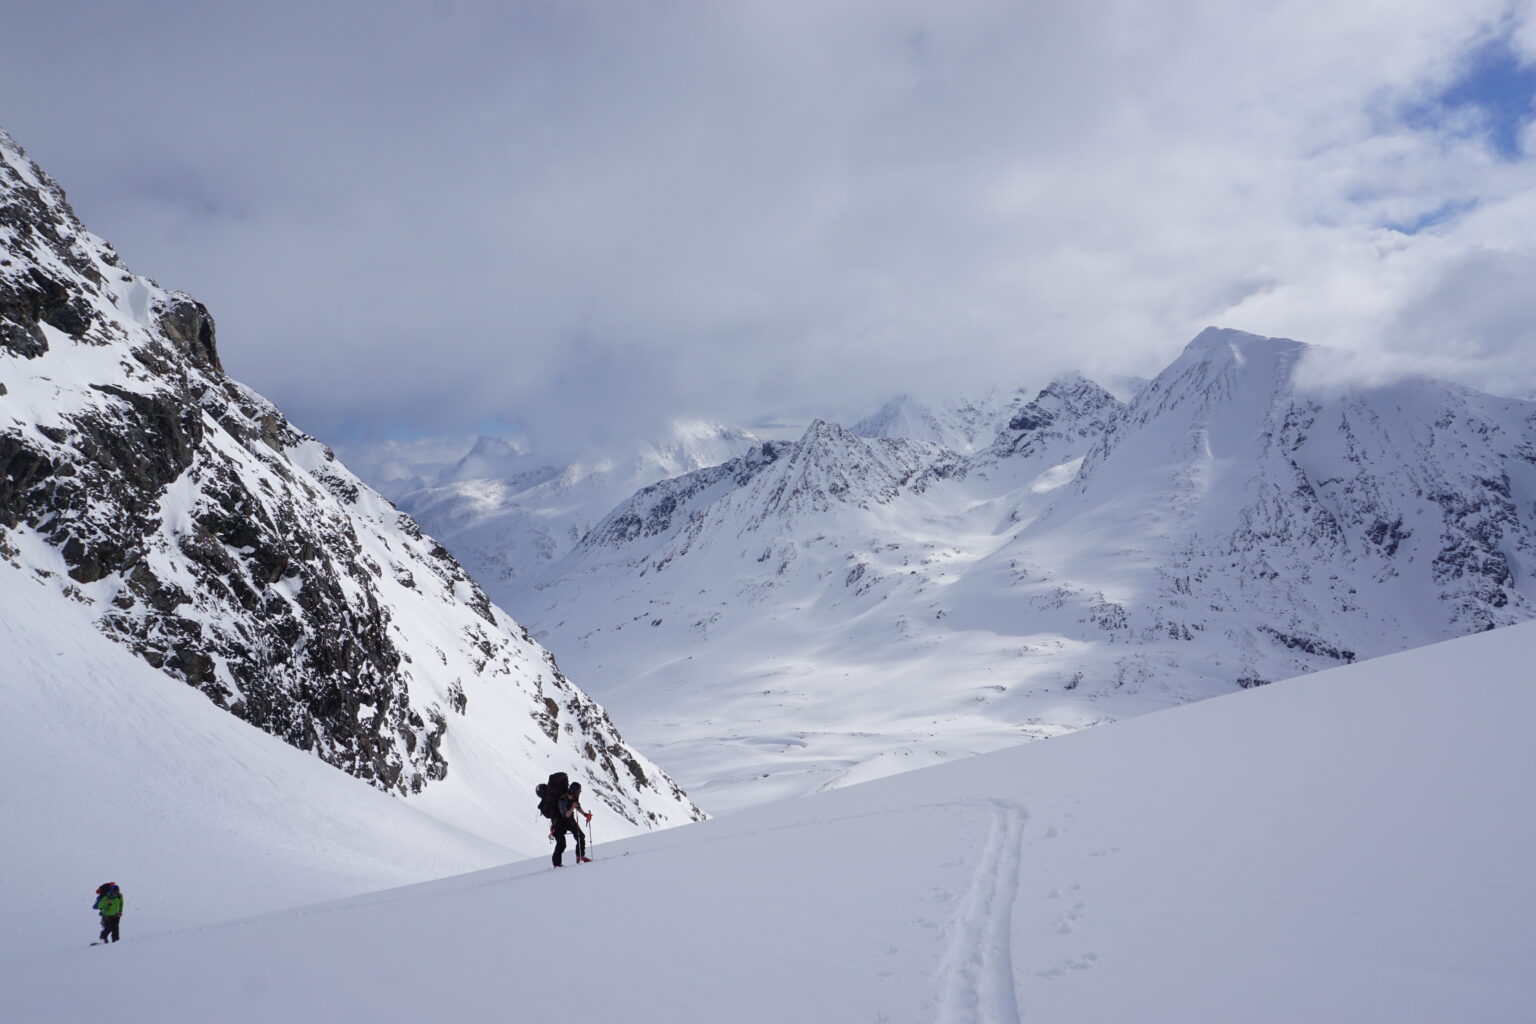 Ski touring up to Tvillingstinden while on the Lyngen Alps Traverse